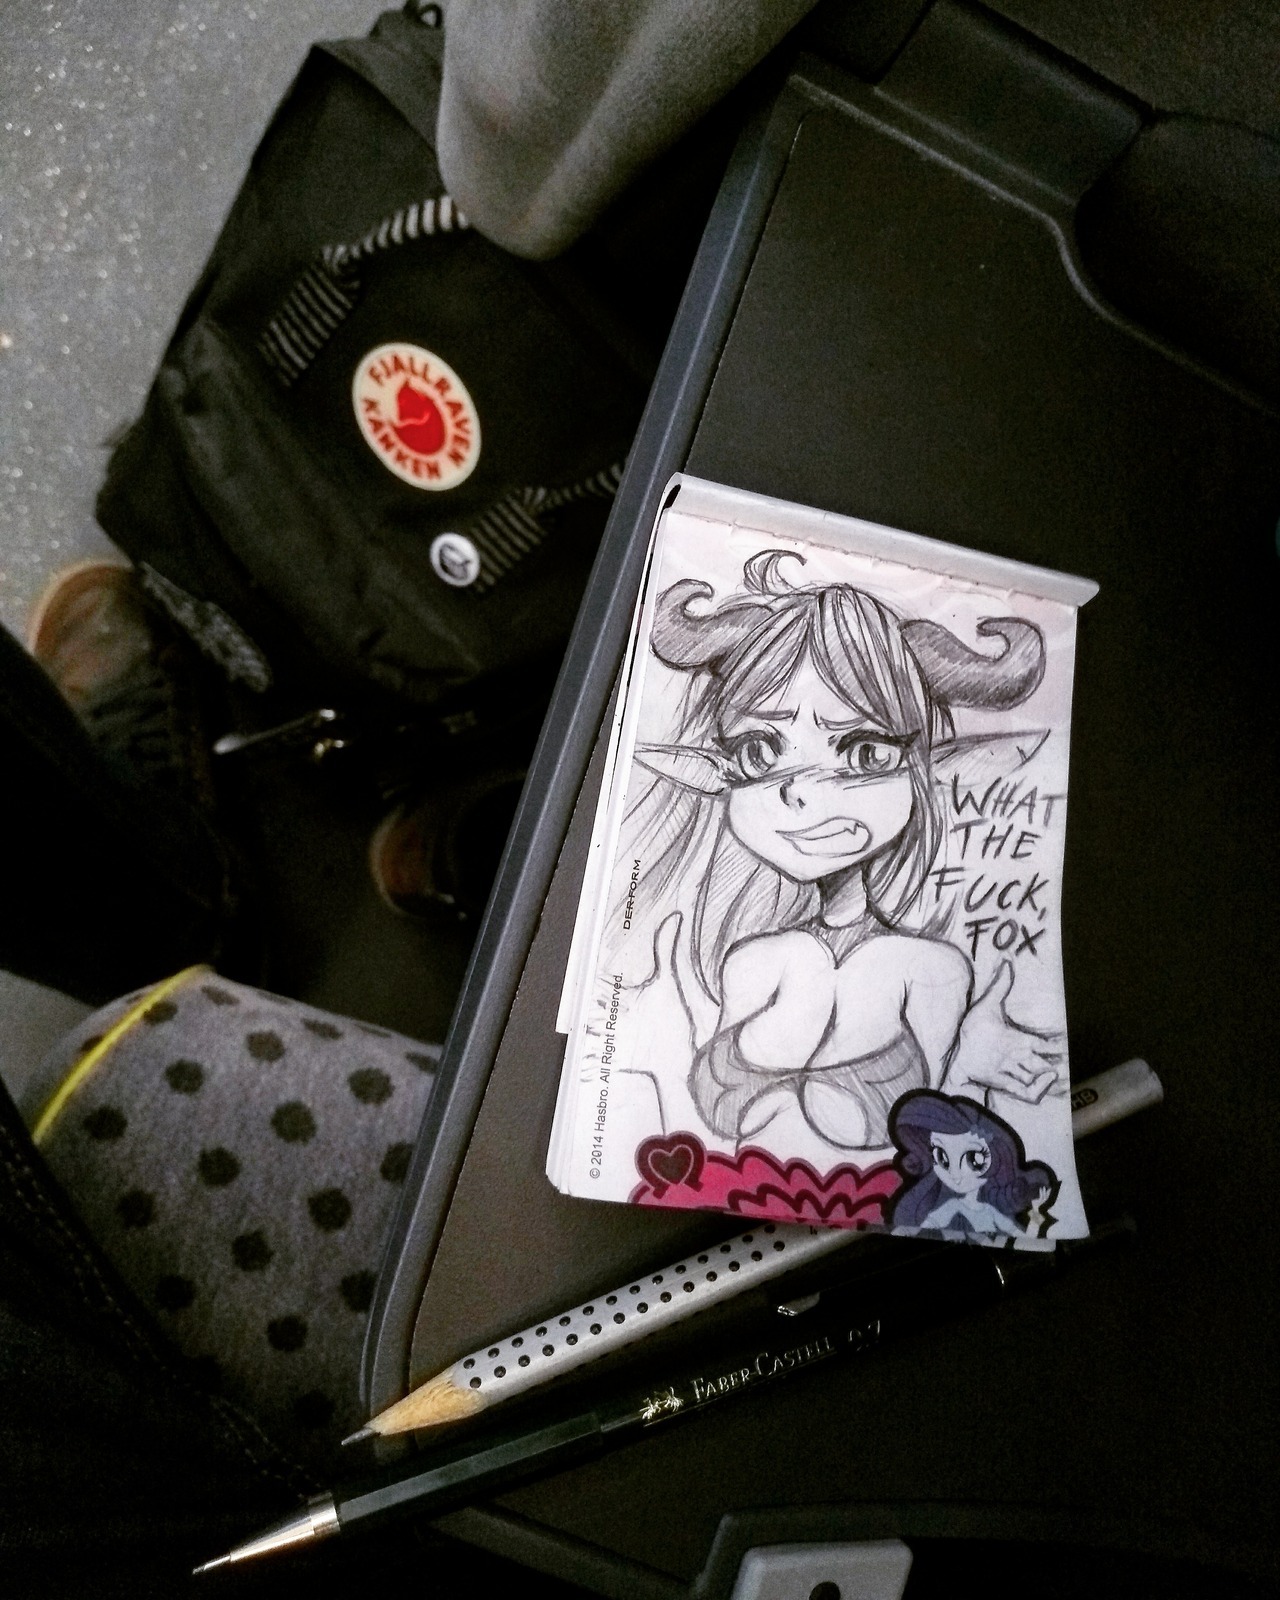 So I was taking the train back to my place when I realized that I left my sketchbook